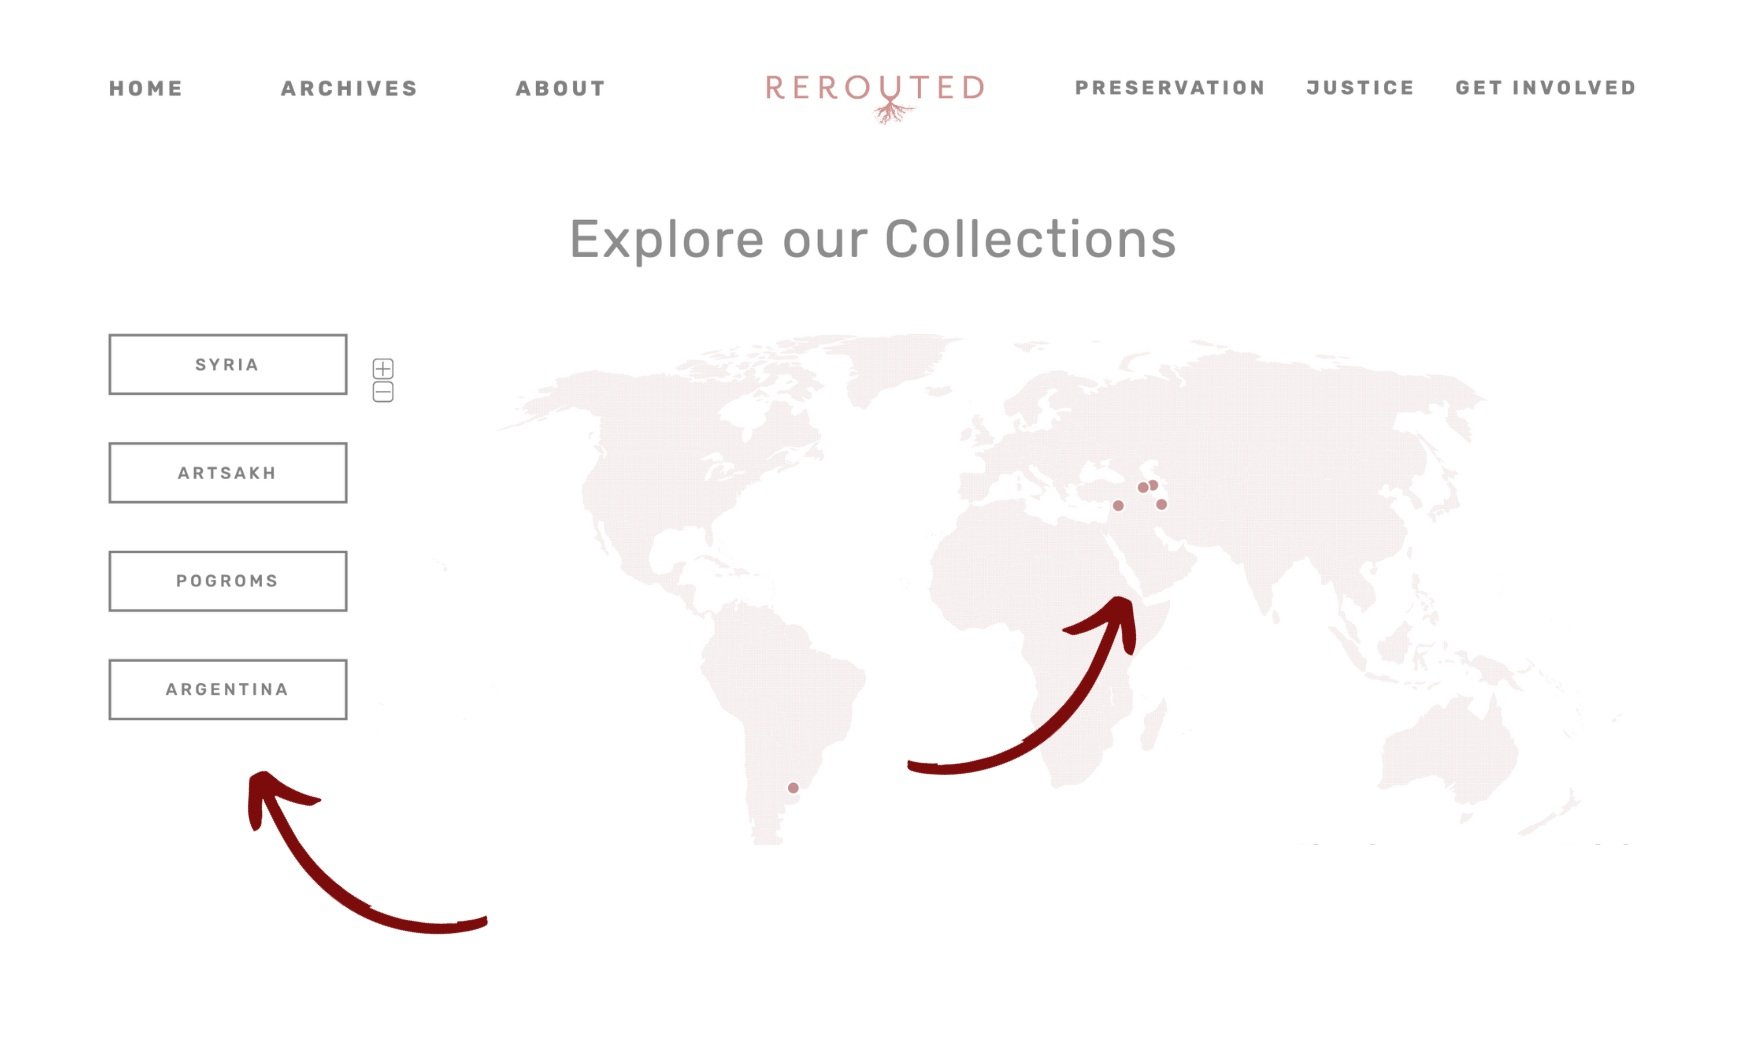  Explore our collections around the world by clicking the dots on the map or the list of communities. 